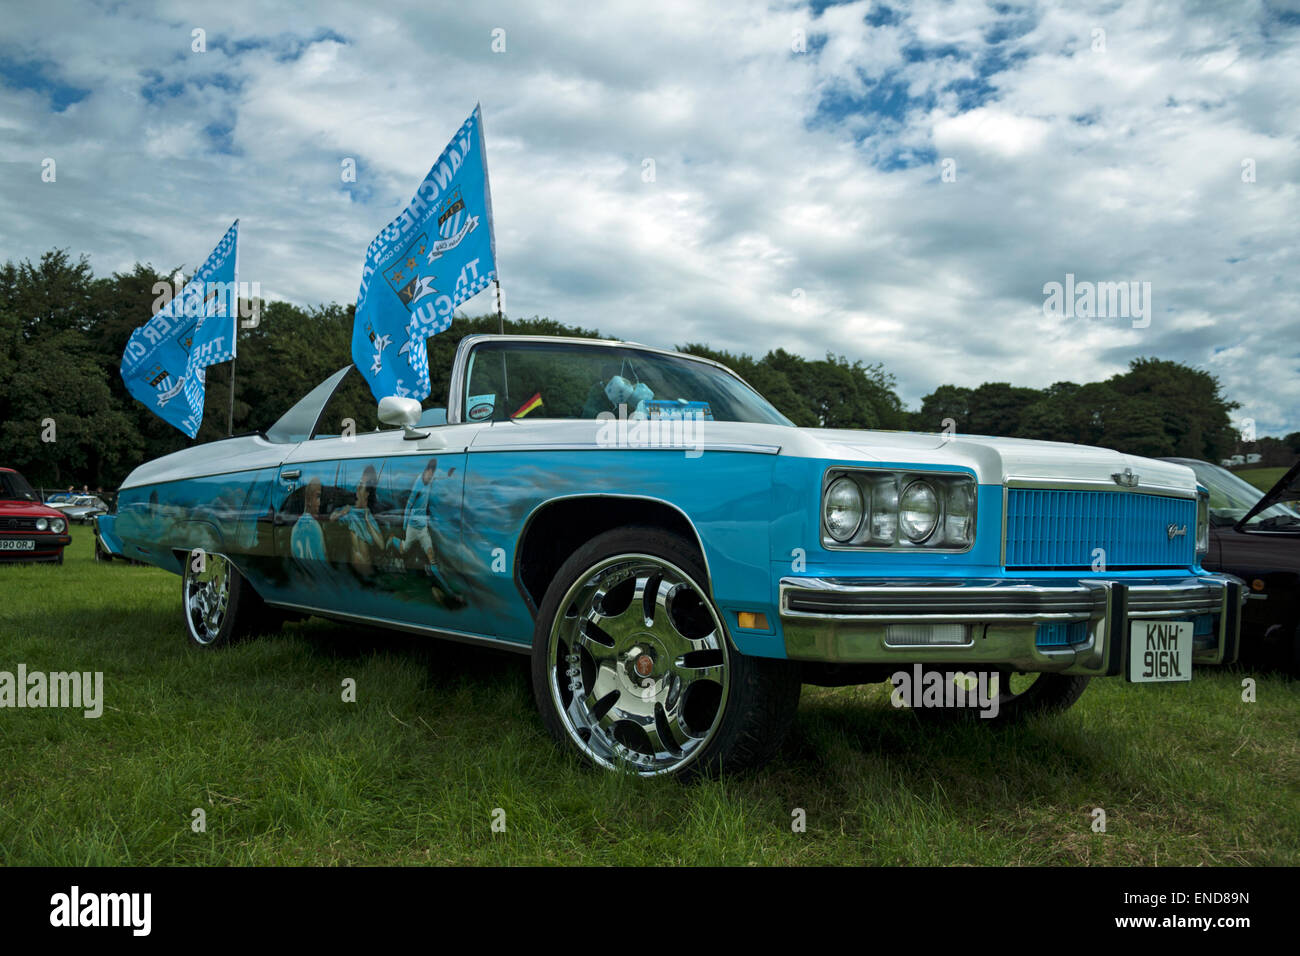 Cadillac Customised In Manchester City F.C. Colours Stock Photo